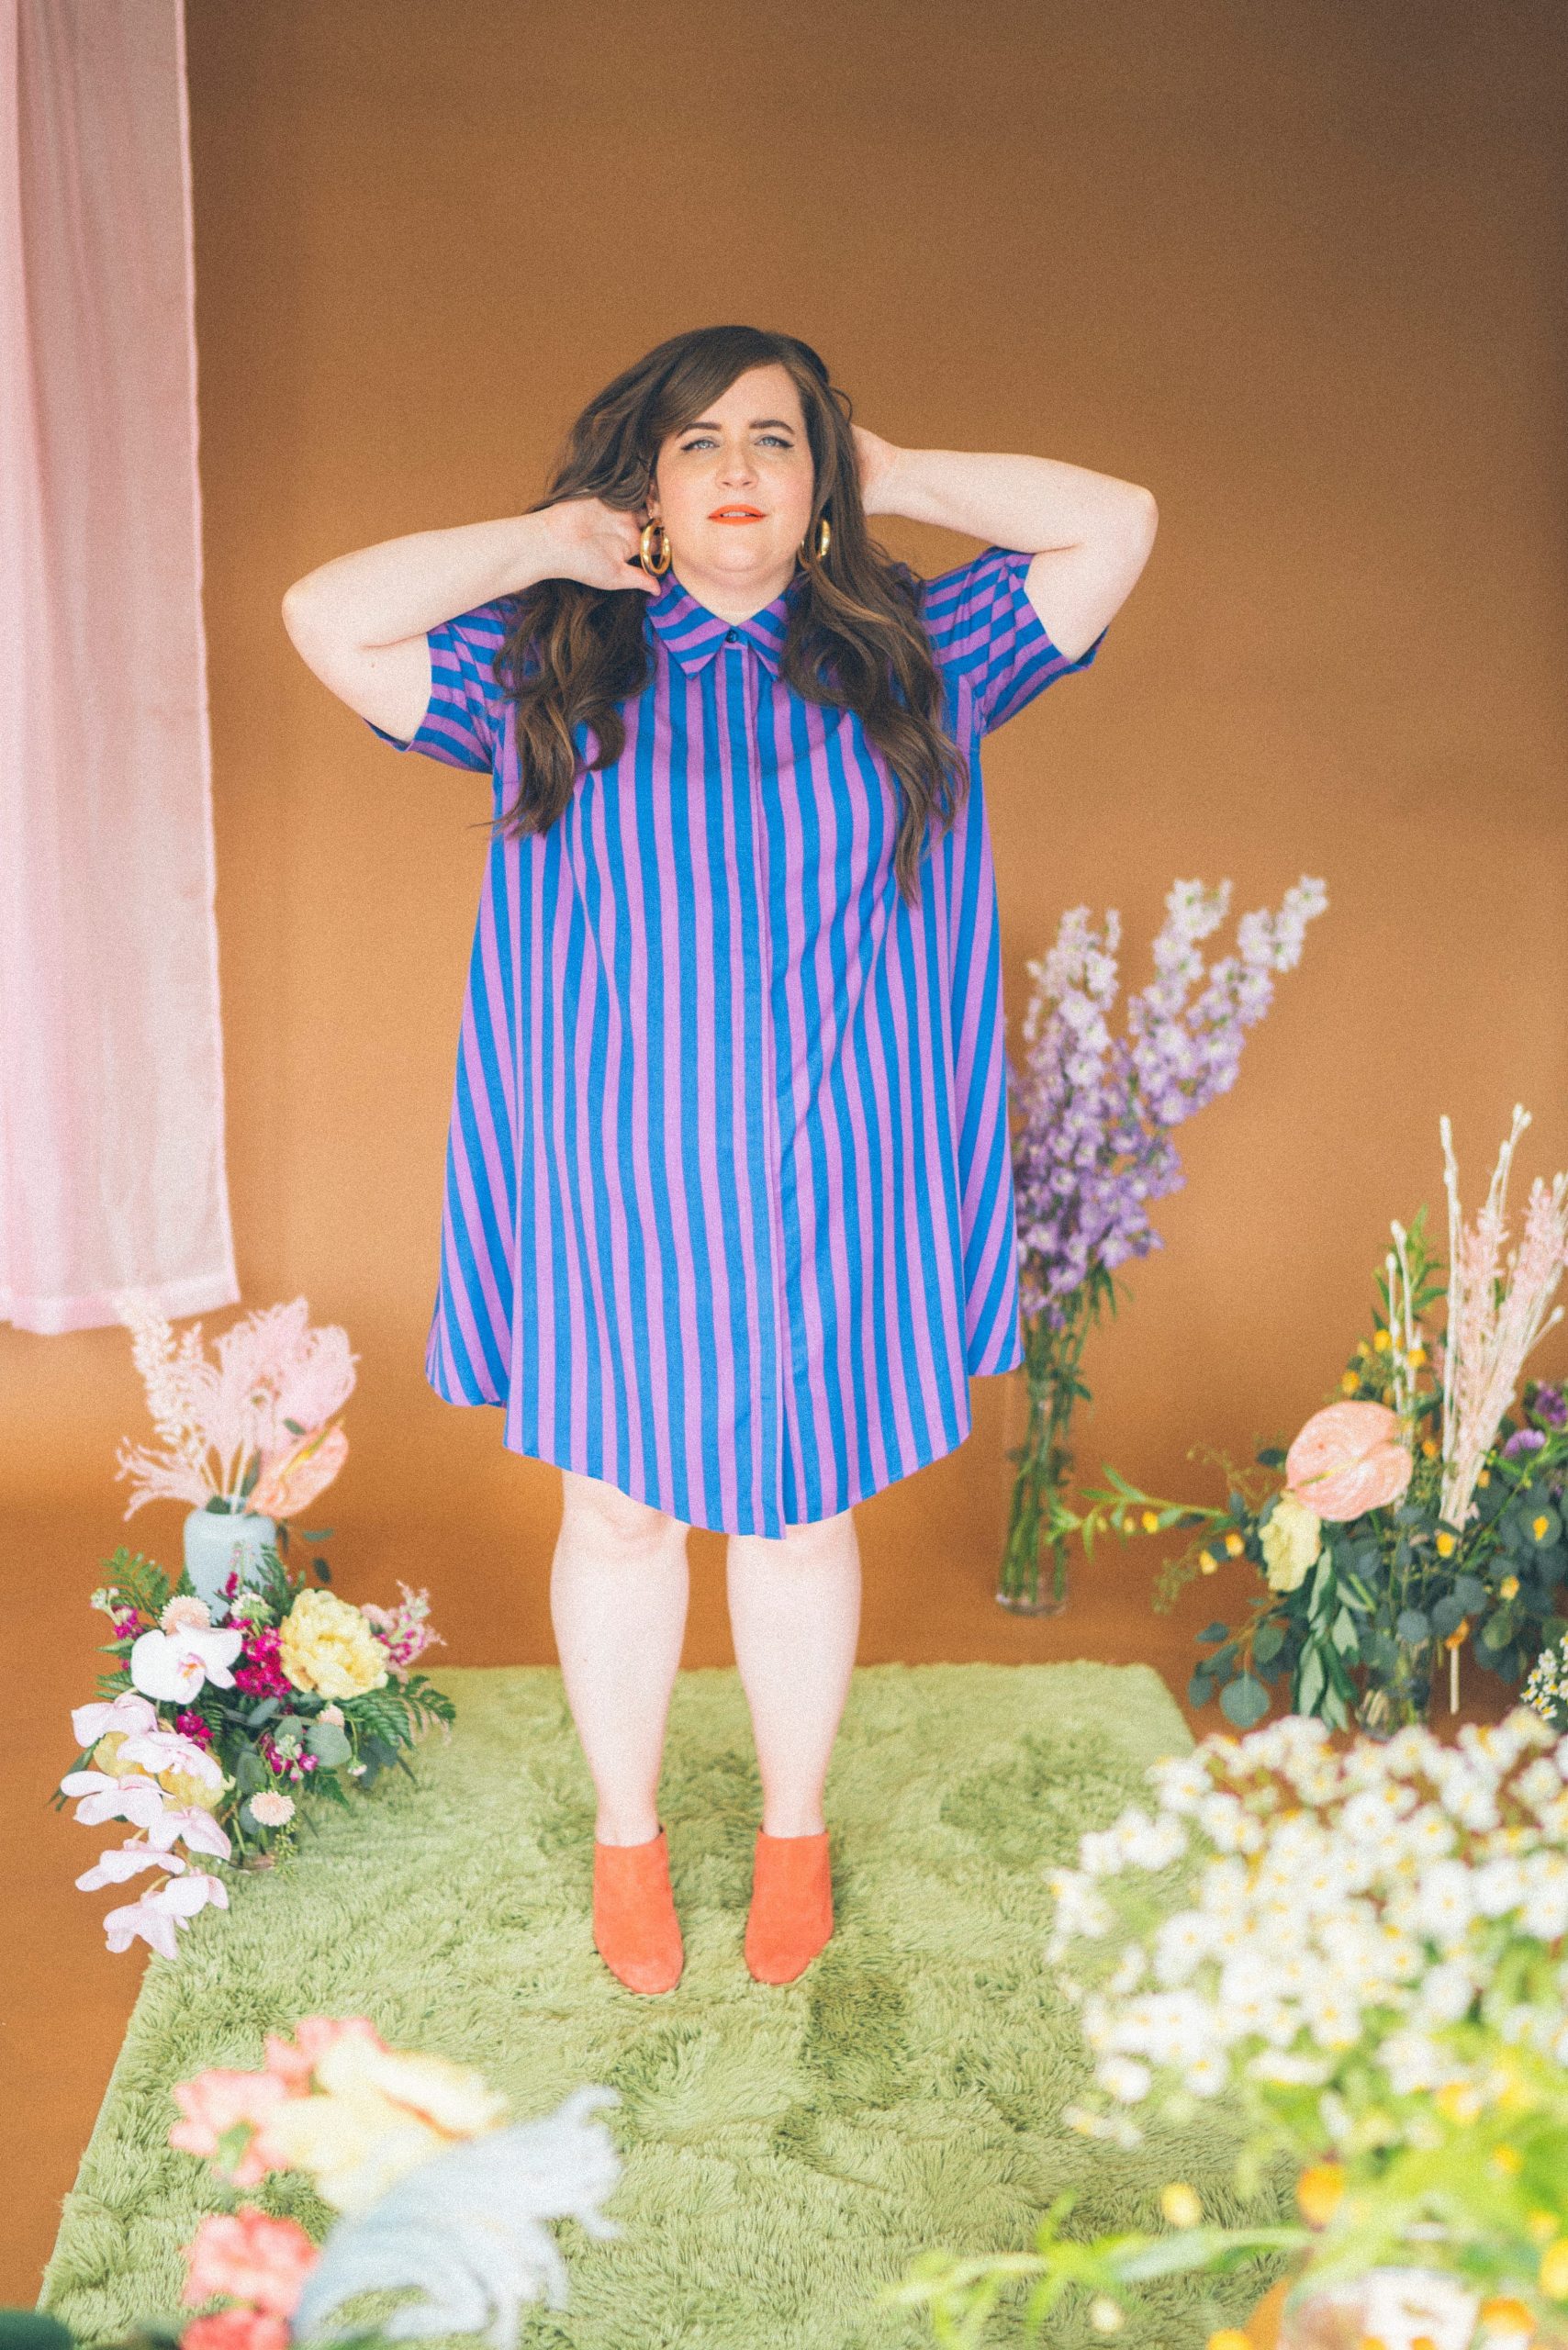 Aidy Bryant's New Clothing Line Is Inspired By Her Own "Exhausting" Experience With Shopping